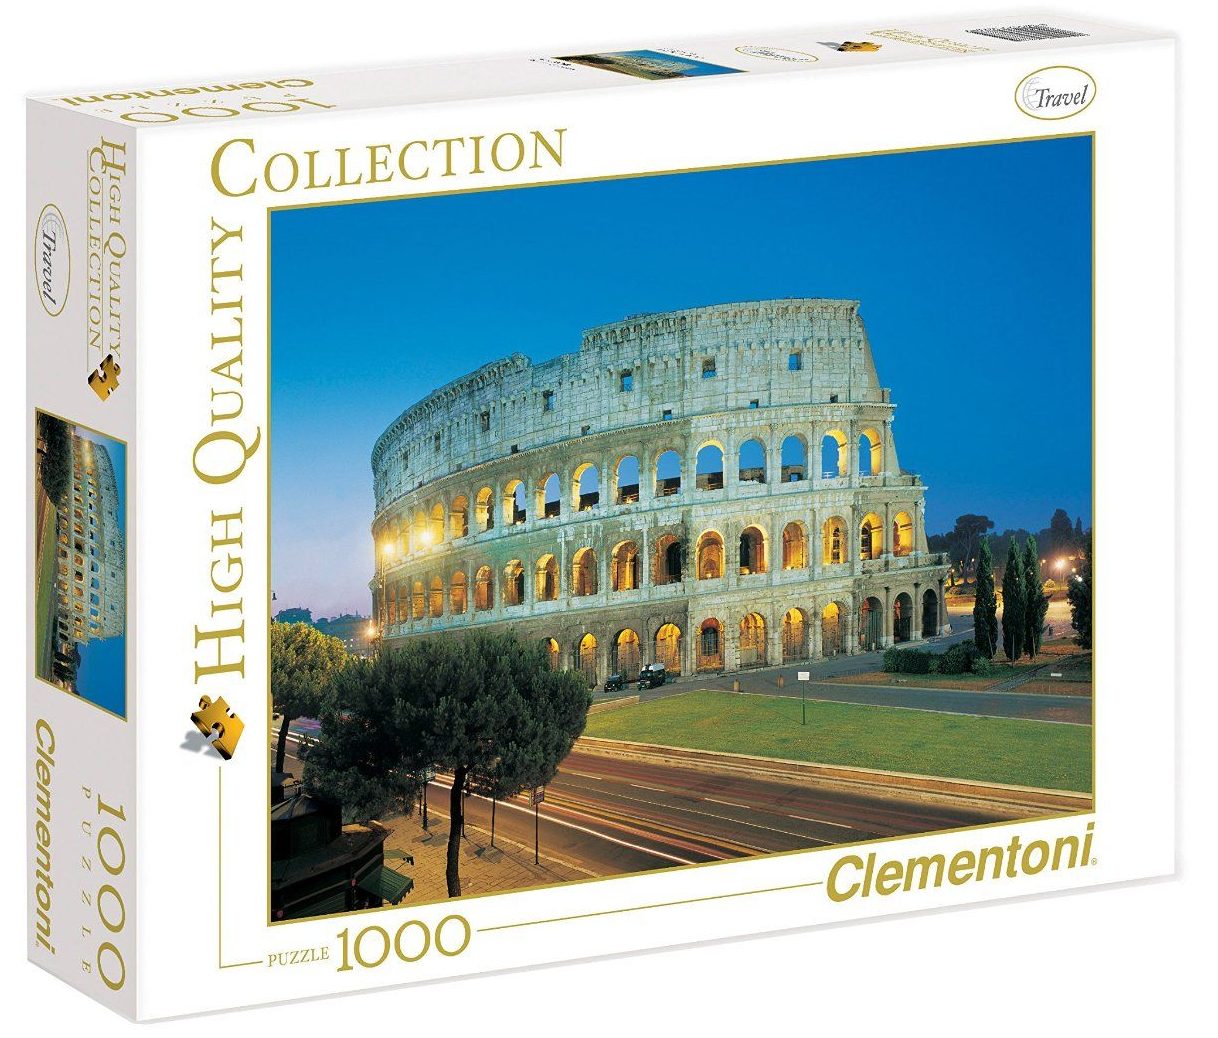 Clementoni High Quality Collection Soiree a Paris Panorama 1000 Piece Puzzle  – The Puzzle Collections